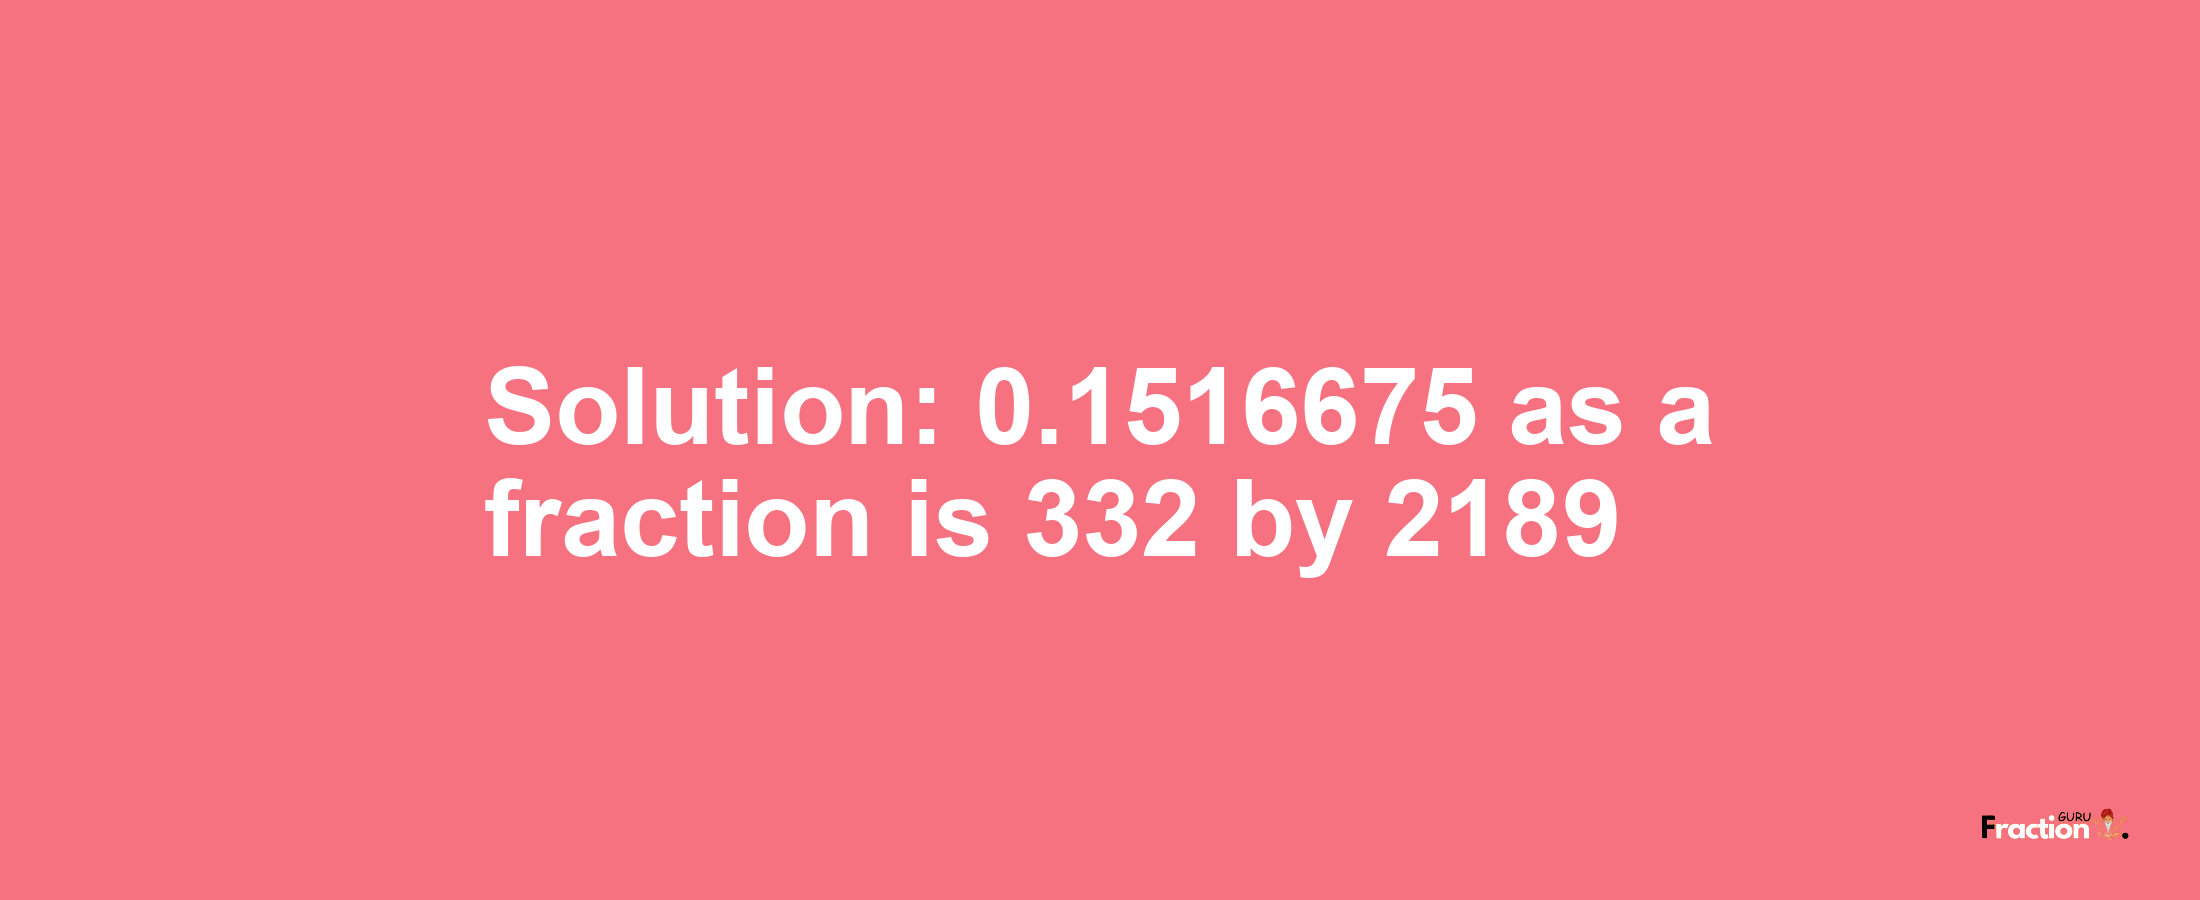 Solution:0.1516675 as a fraction is 332/2189